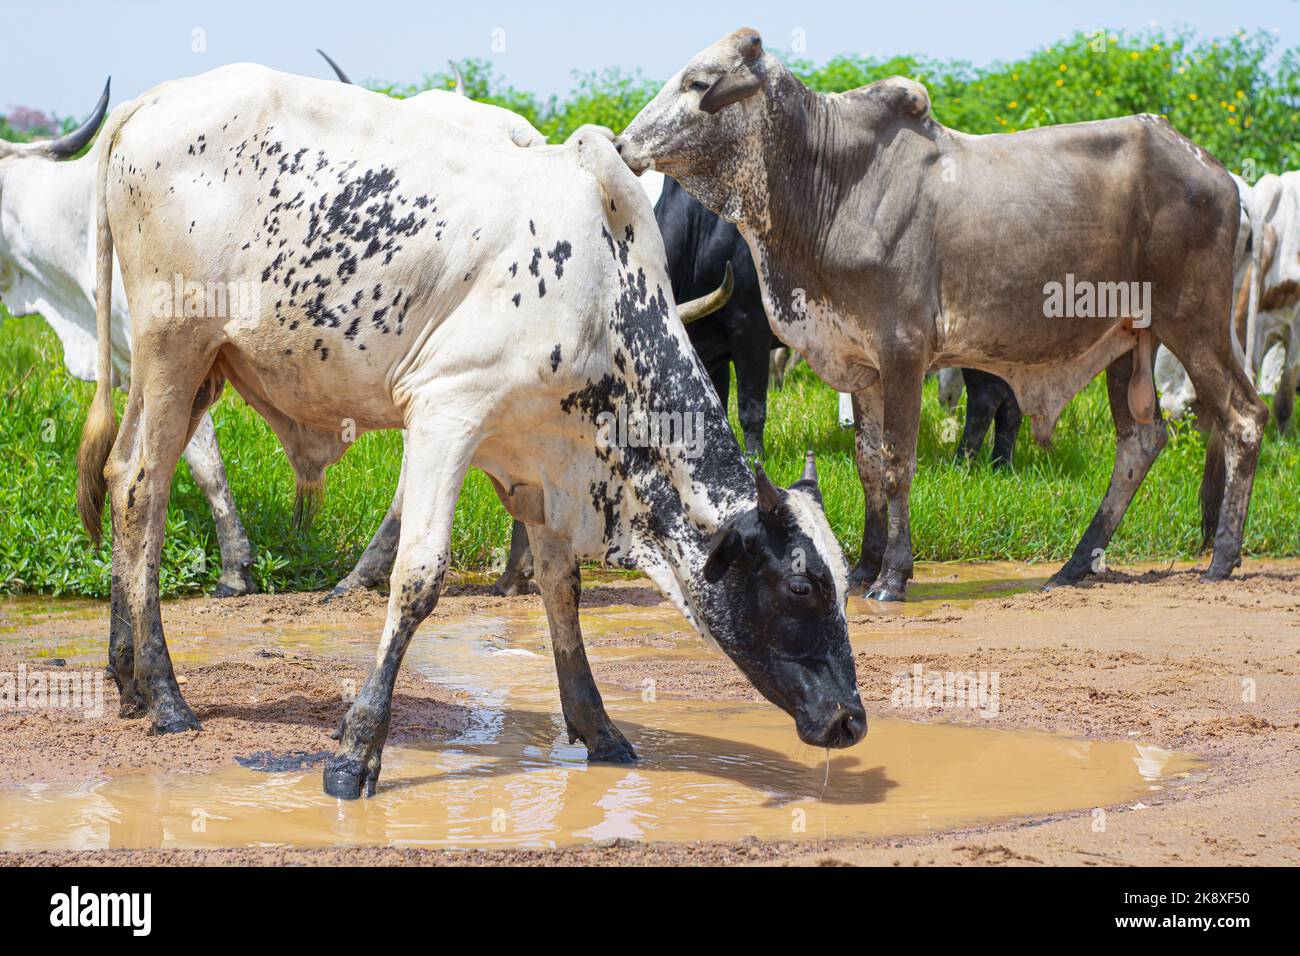 YOUNG COW THIRSTY ON ROAD Stock Photo